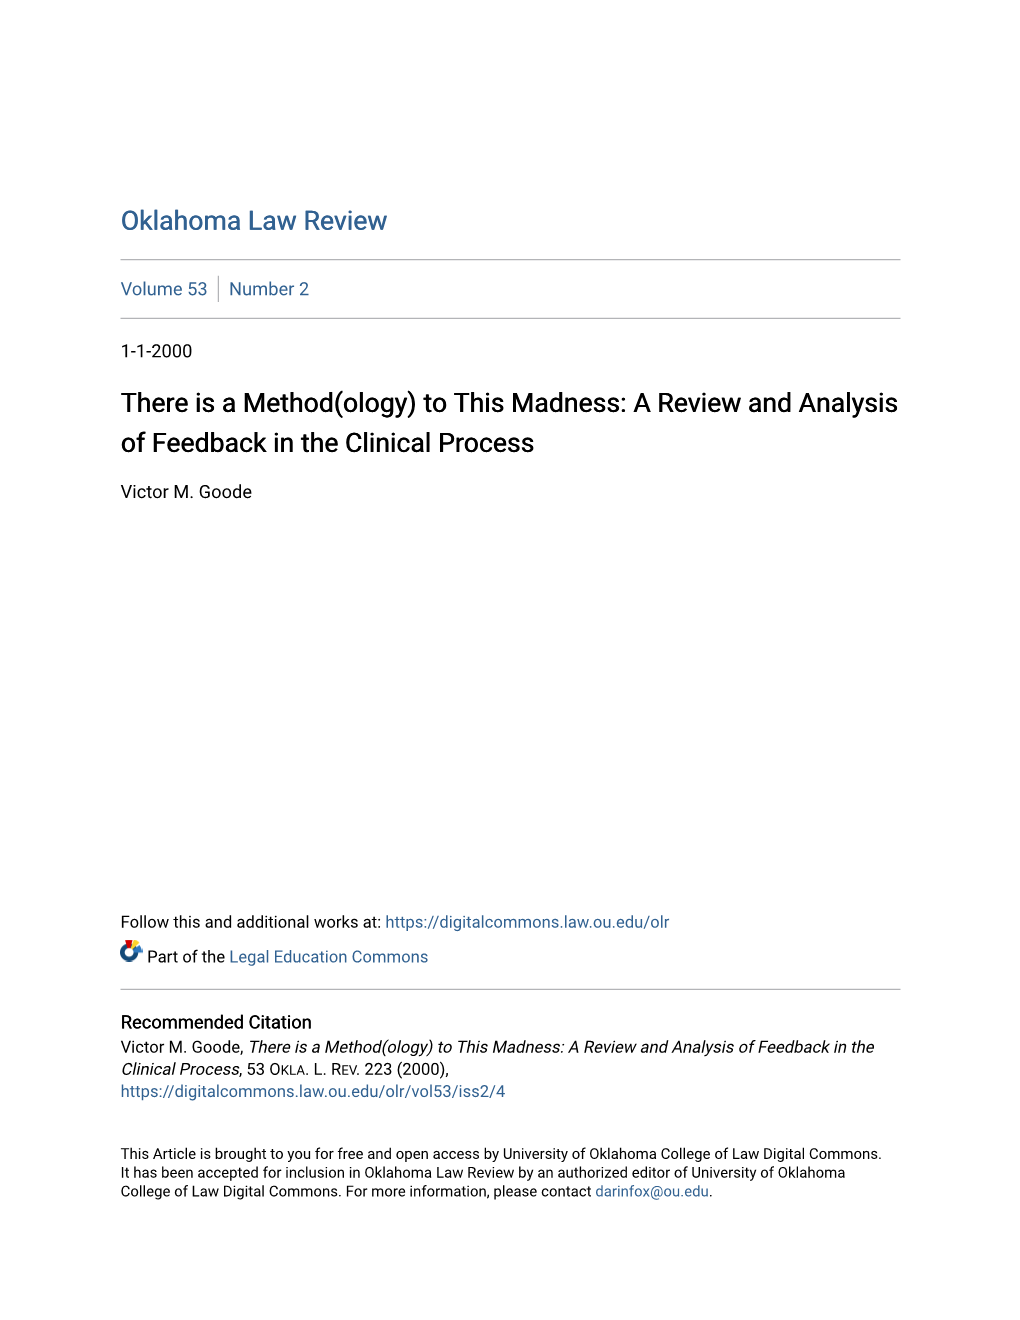 A Review and Analysis of Feedback in the Clinical Process